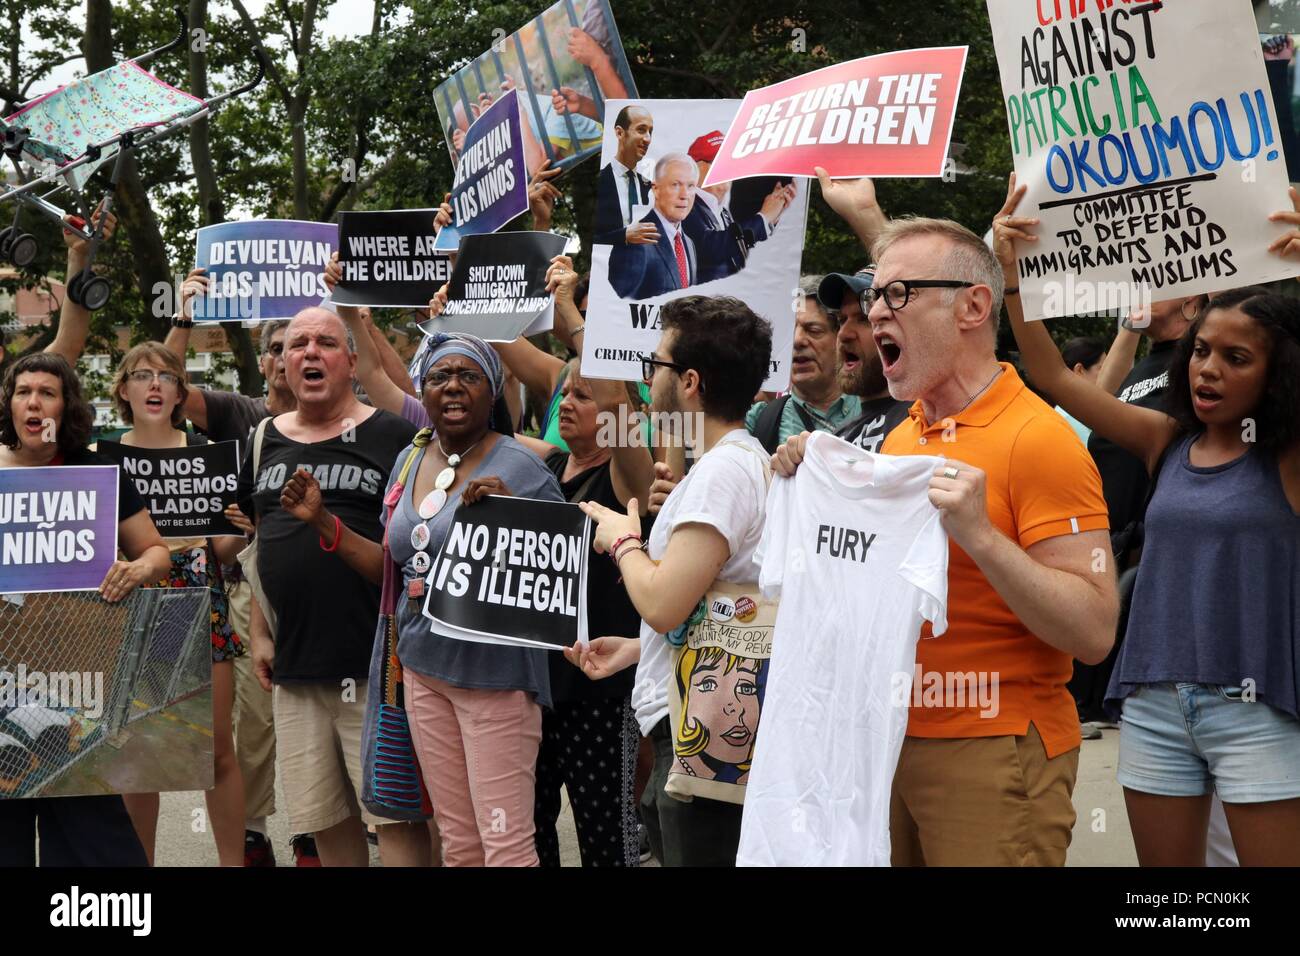 New York, NY USA. O3 Aug, 2018. Supporters of Therese Patricia Okoumou, 44, the woman who was arrested on 4th. July, 2018, after  after she climbed onto the base of the Statue of Liberty to protest the Trump administration’s immigration policies, made a procedural court appearance in New York City on 3 Aug, 2018. The ‘Rise and Resist’ activist was  ordered to reappear in court on 1st. October, 2018. © 2018 G. Ronald Lopez/DigiPixsAgain.us/Alamy Live News Stock Photo